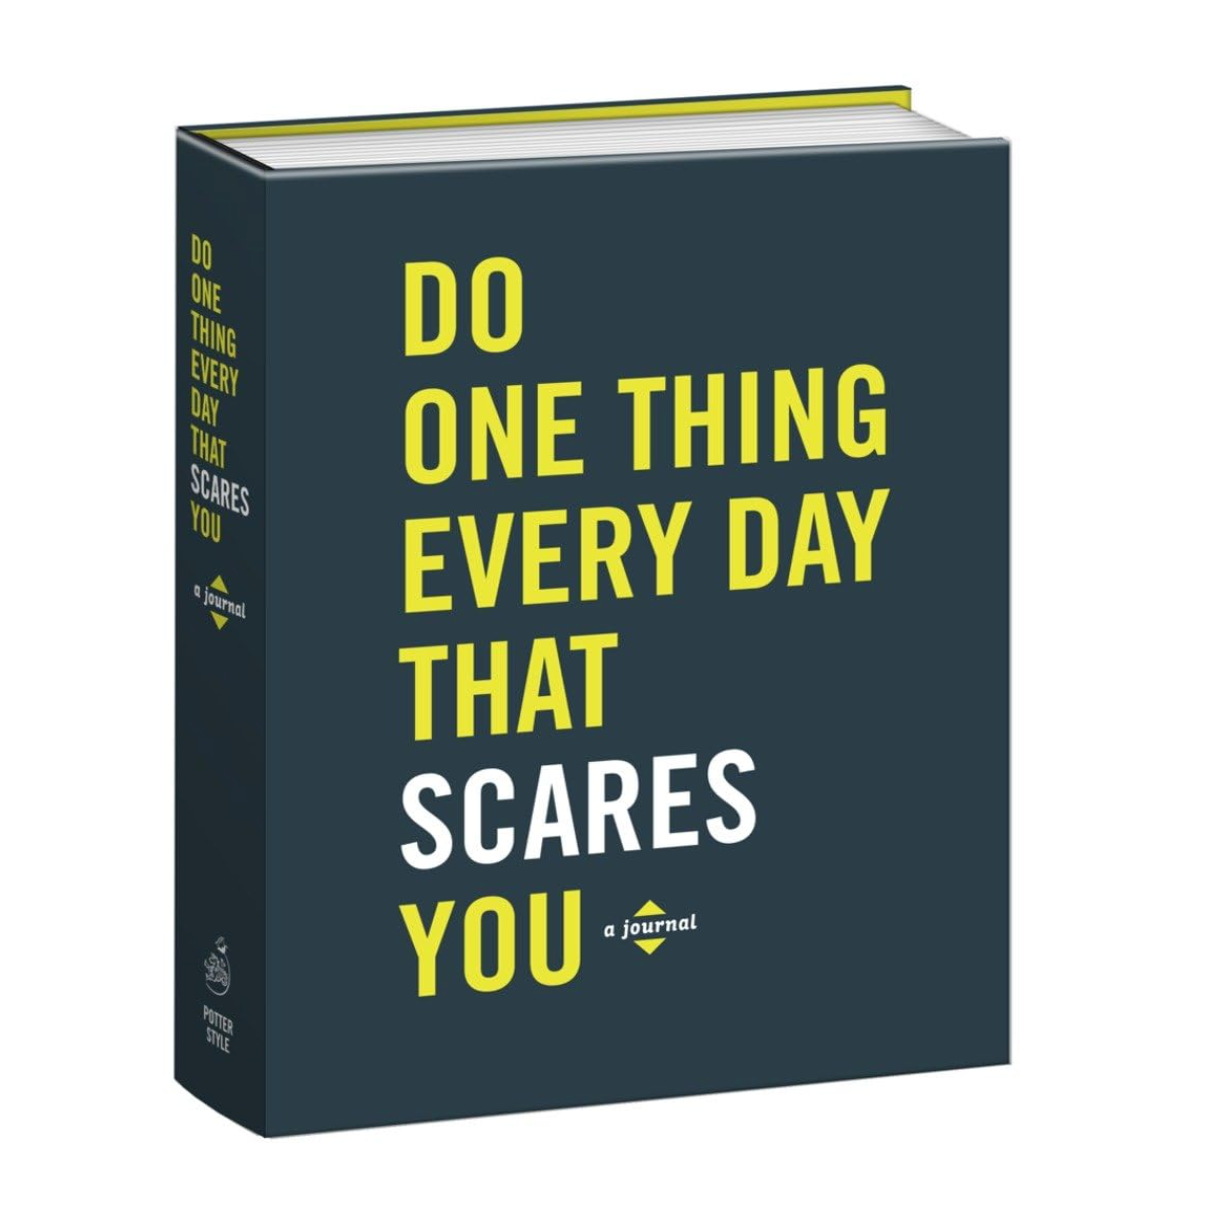 Do One Thing Every Day That Scares You Journal - 368 pages